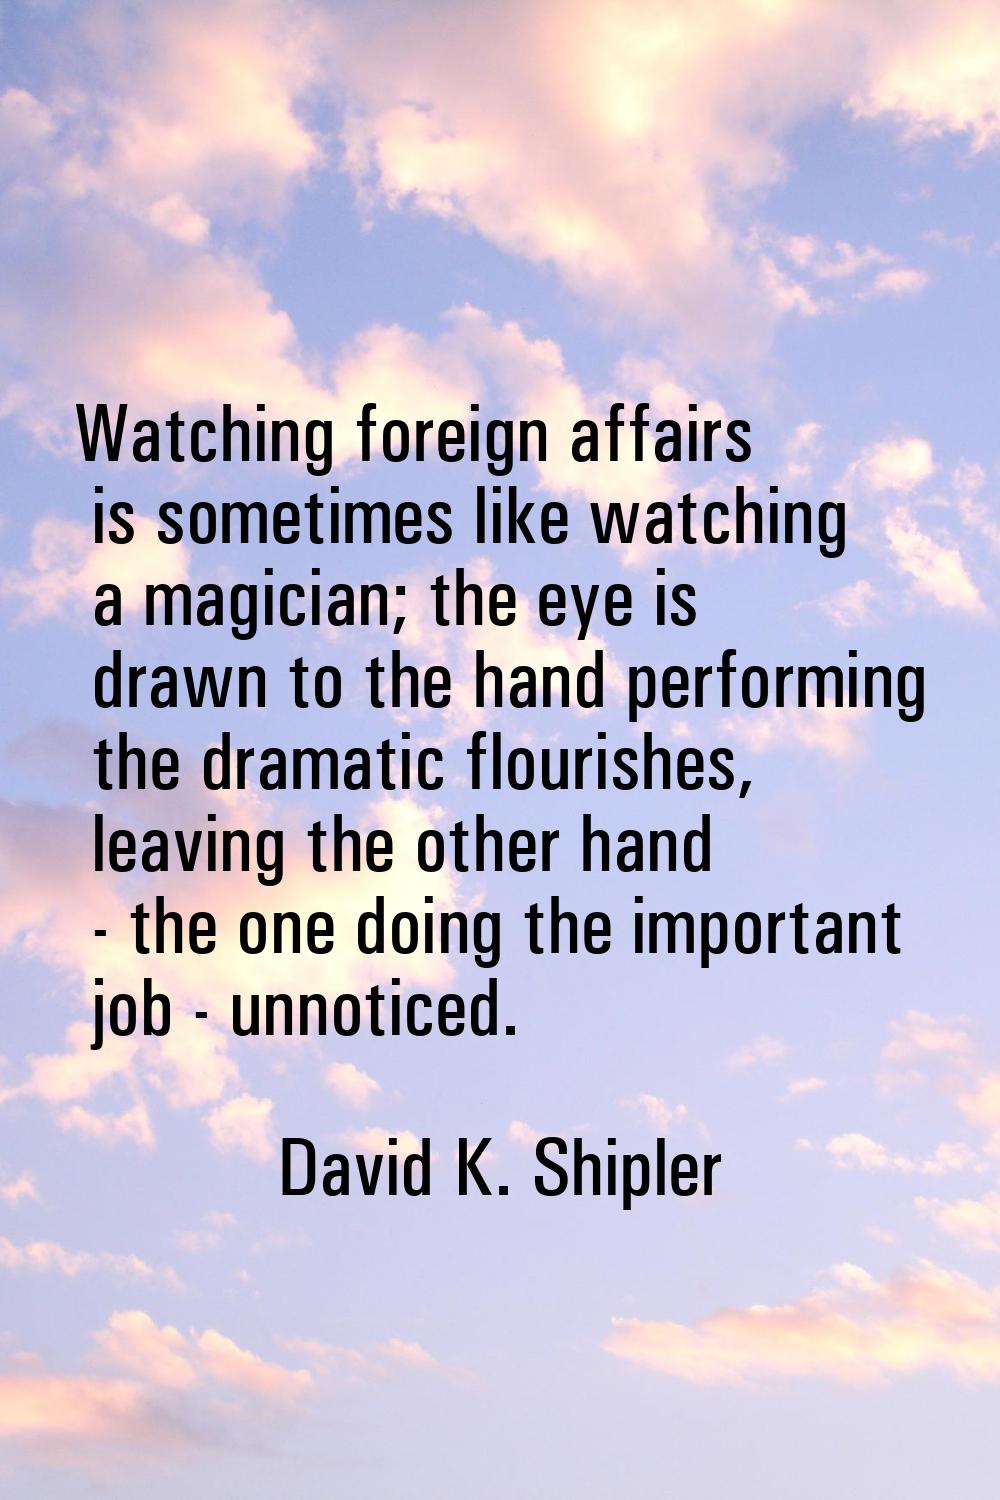 Watching foreign affairs is sometimes like watching a magician; the eye is drawn to the hand perfor